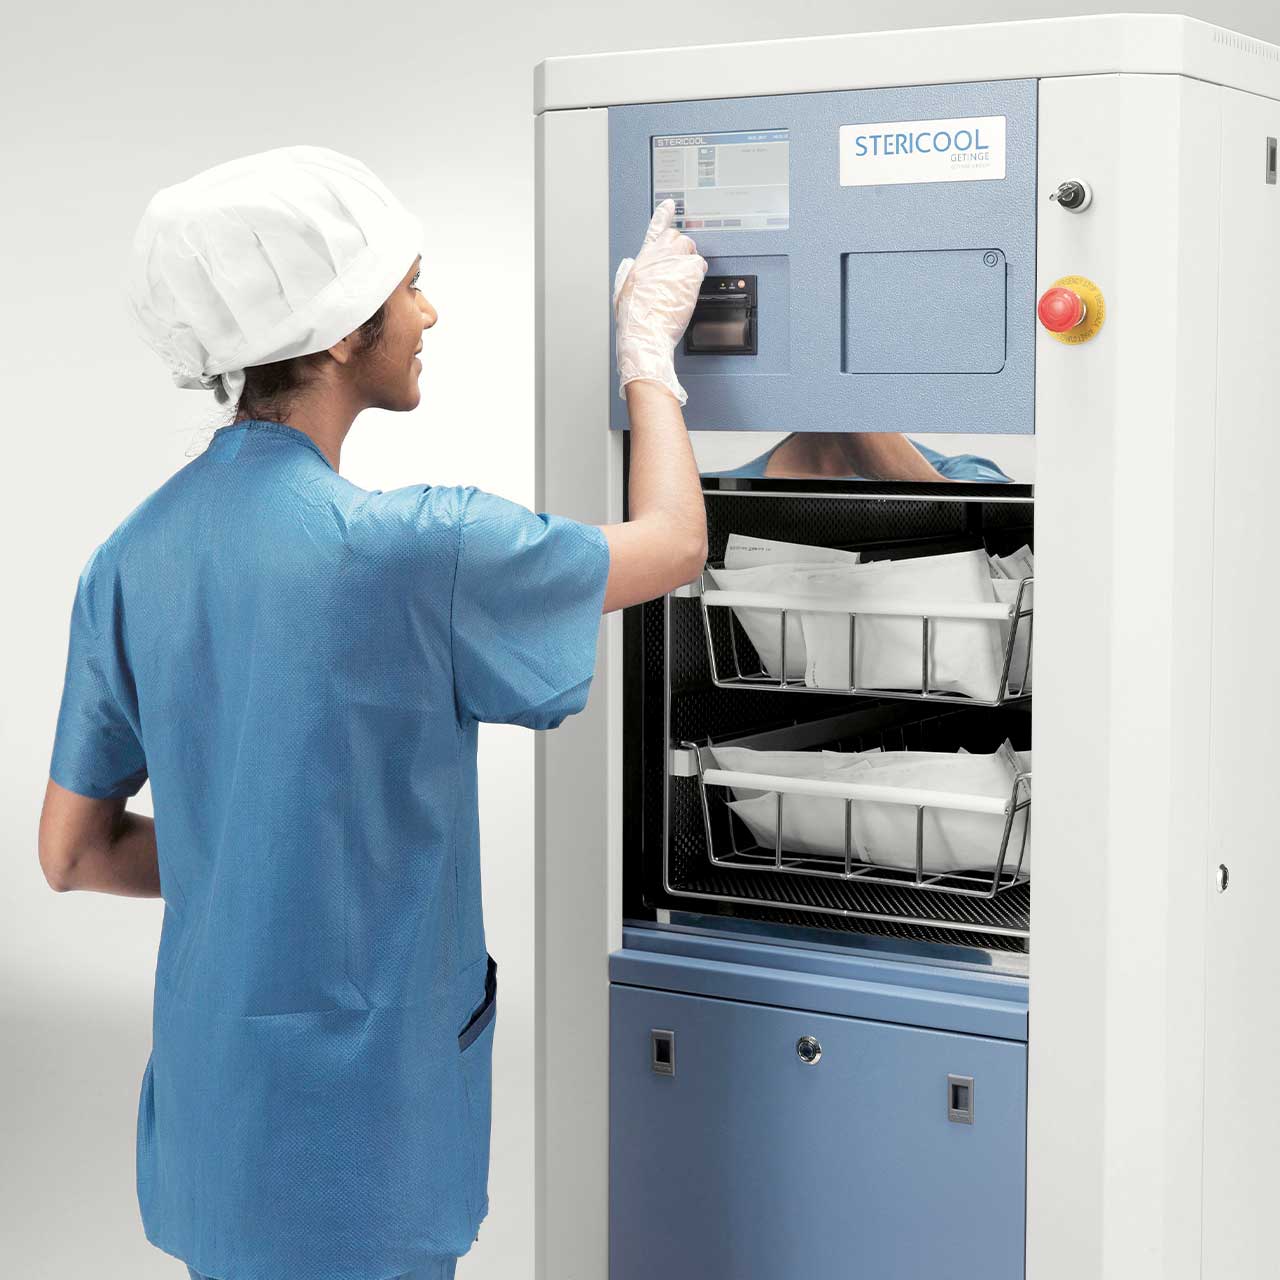 Stericool H2O2 plasma sterilizers offer a range of sizes and sterilization programs to suit a wide range of instruments